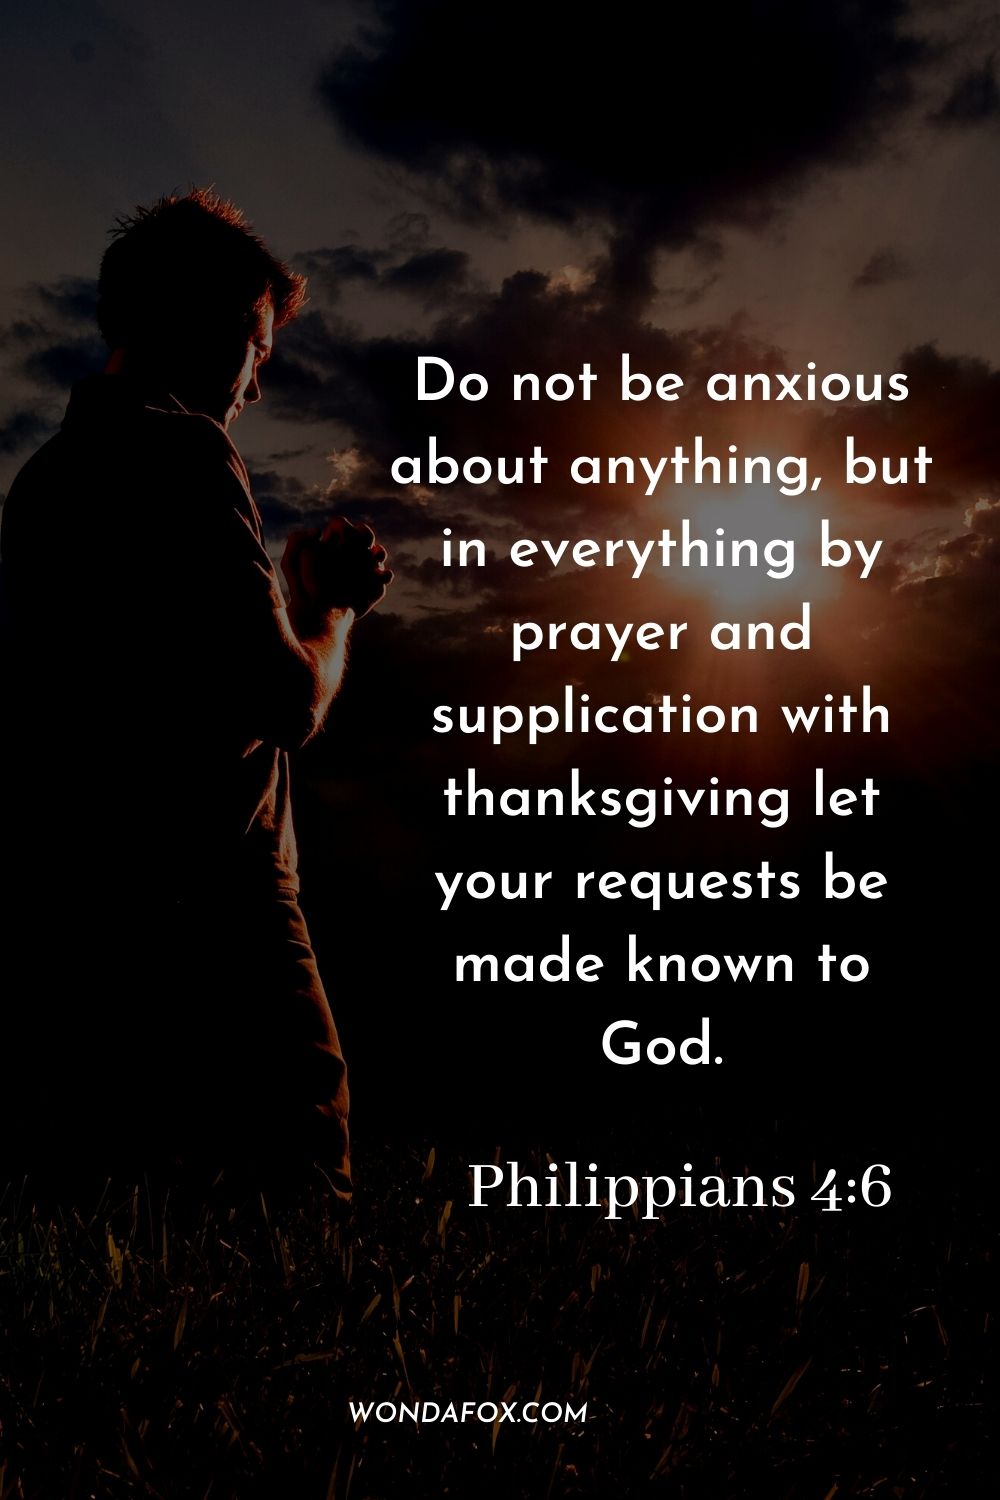 Do not be anxious about anything, but in everything by prayer and supplication with thanksgiving let your requests be made known to God. Philippians 4:6